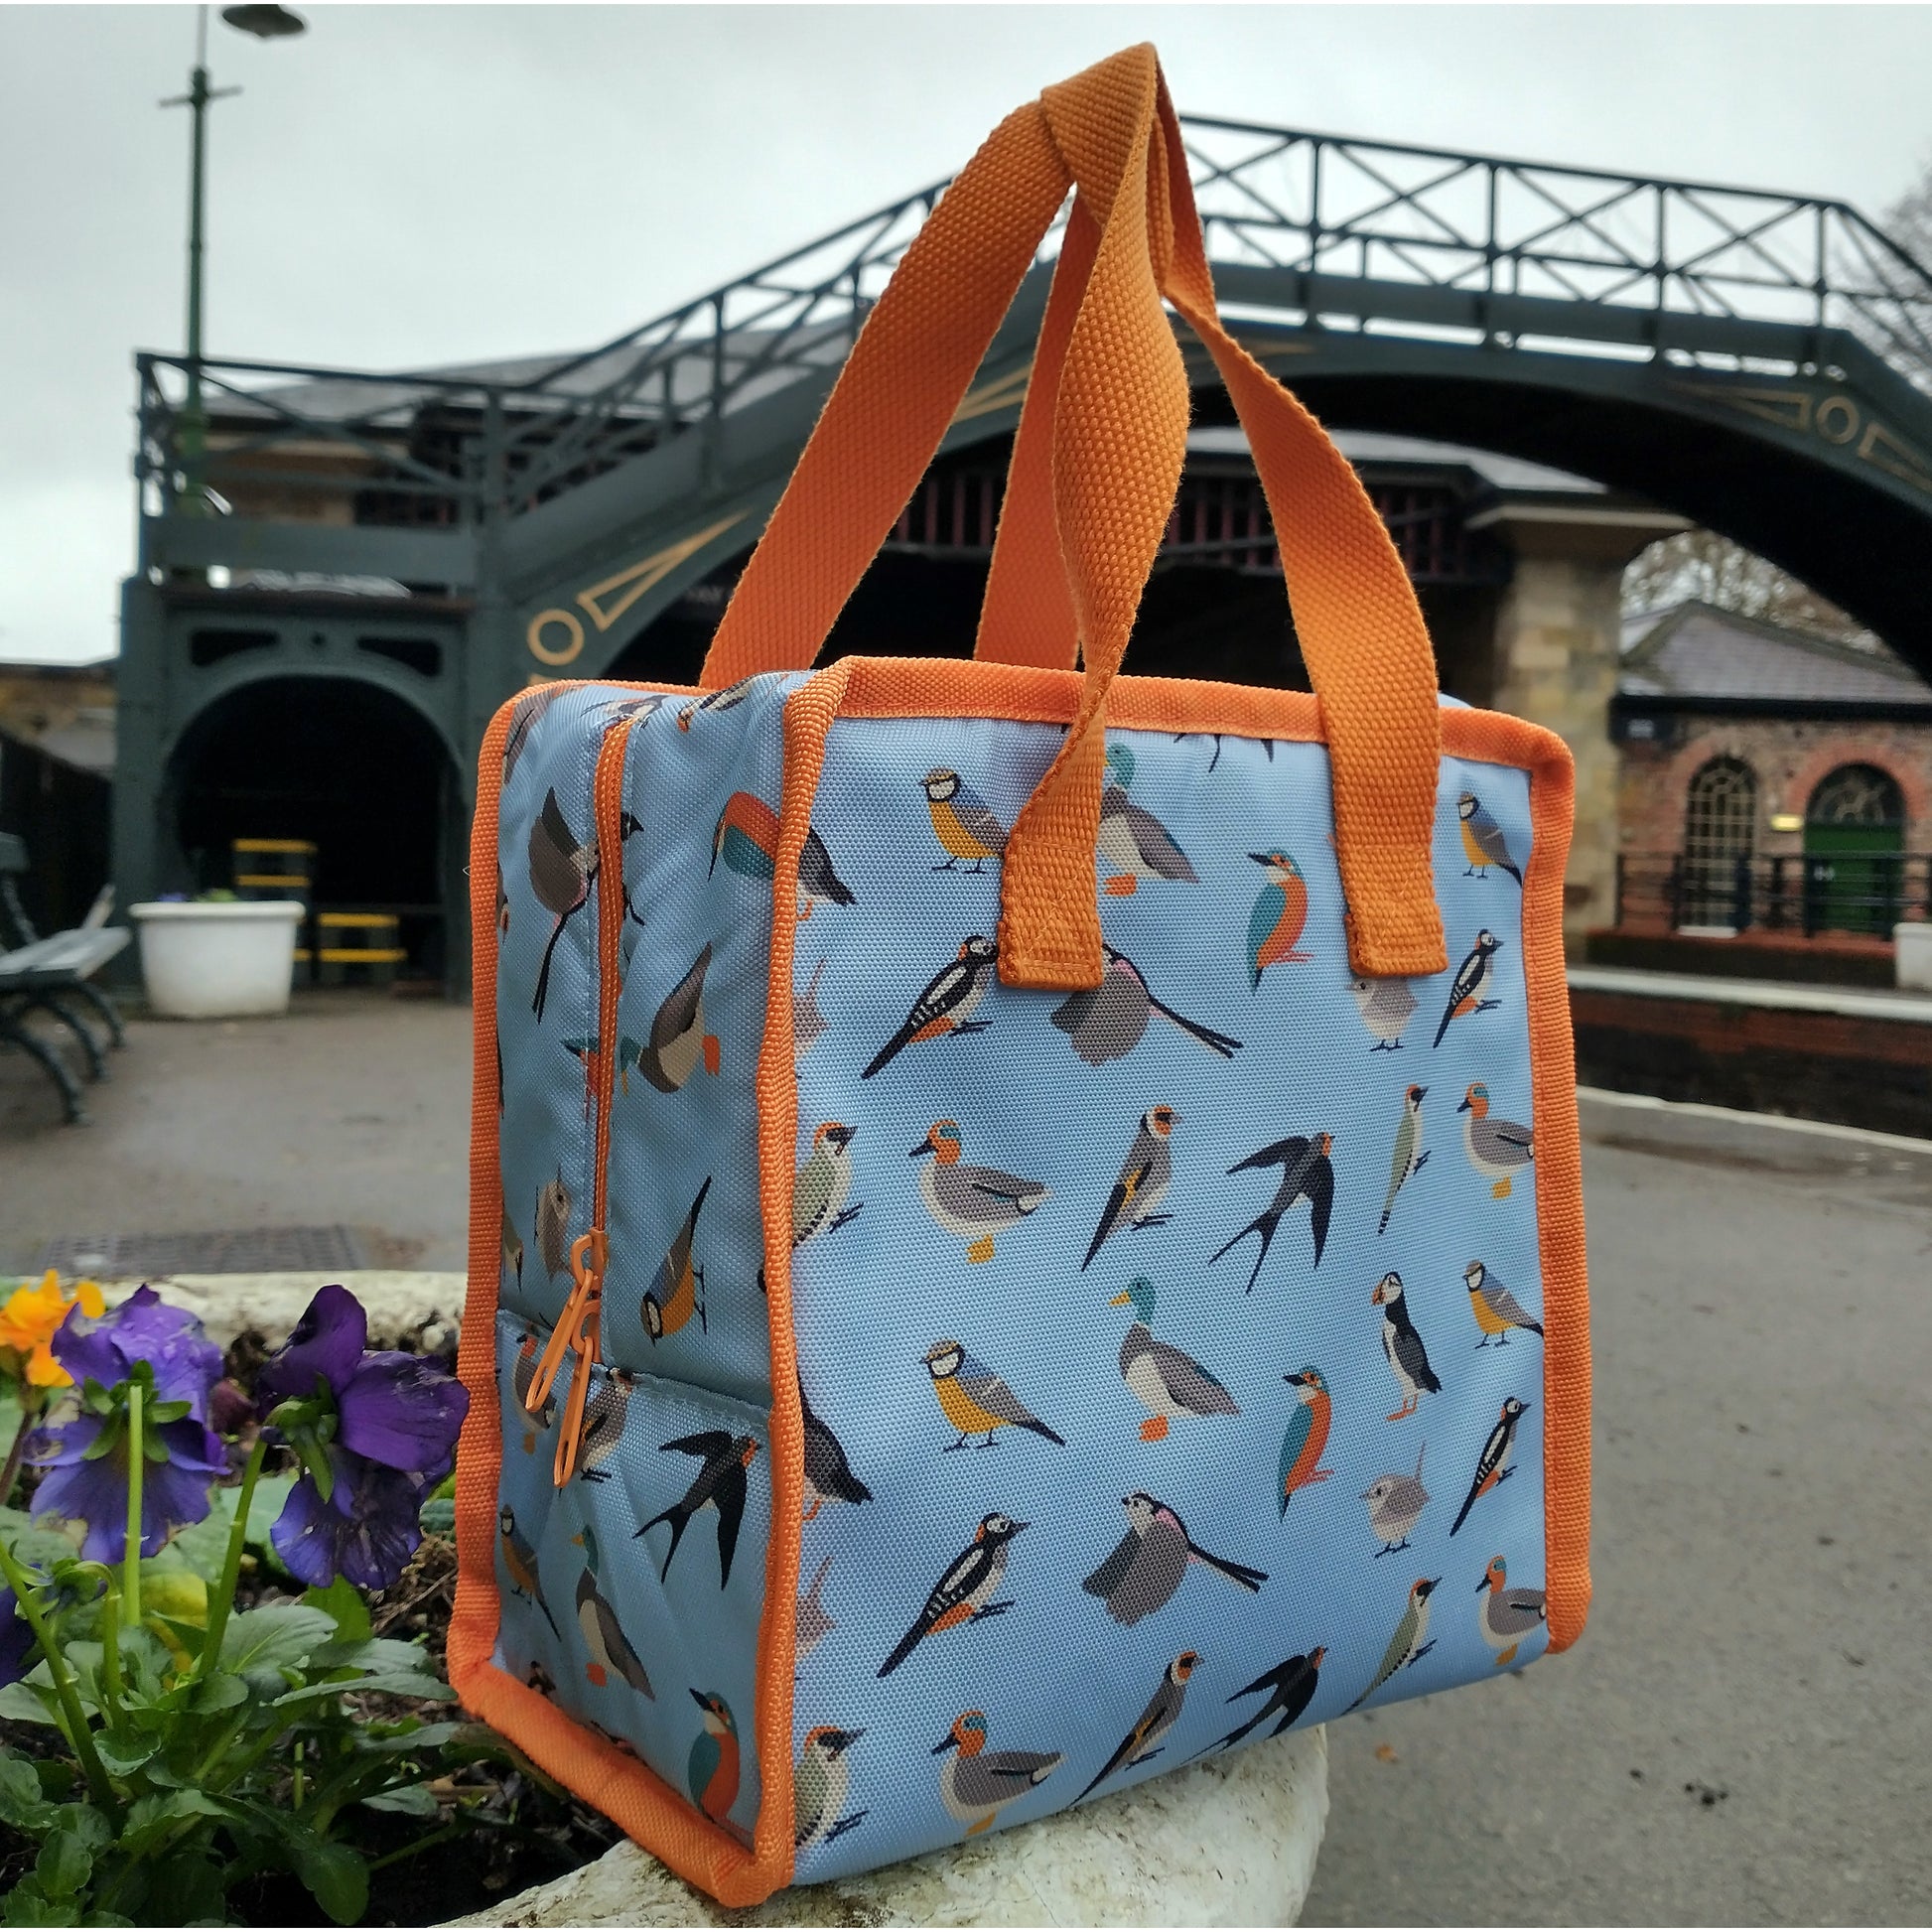 Lunch bag on Pickering Station Platform with light blue background, orange straps and zip and British bird illustrations all over.